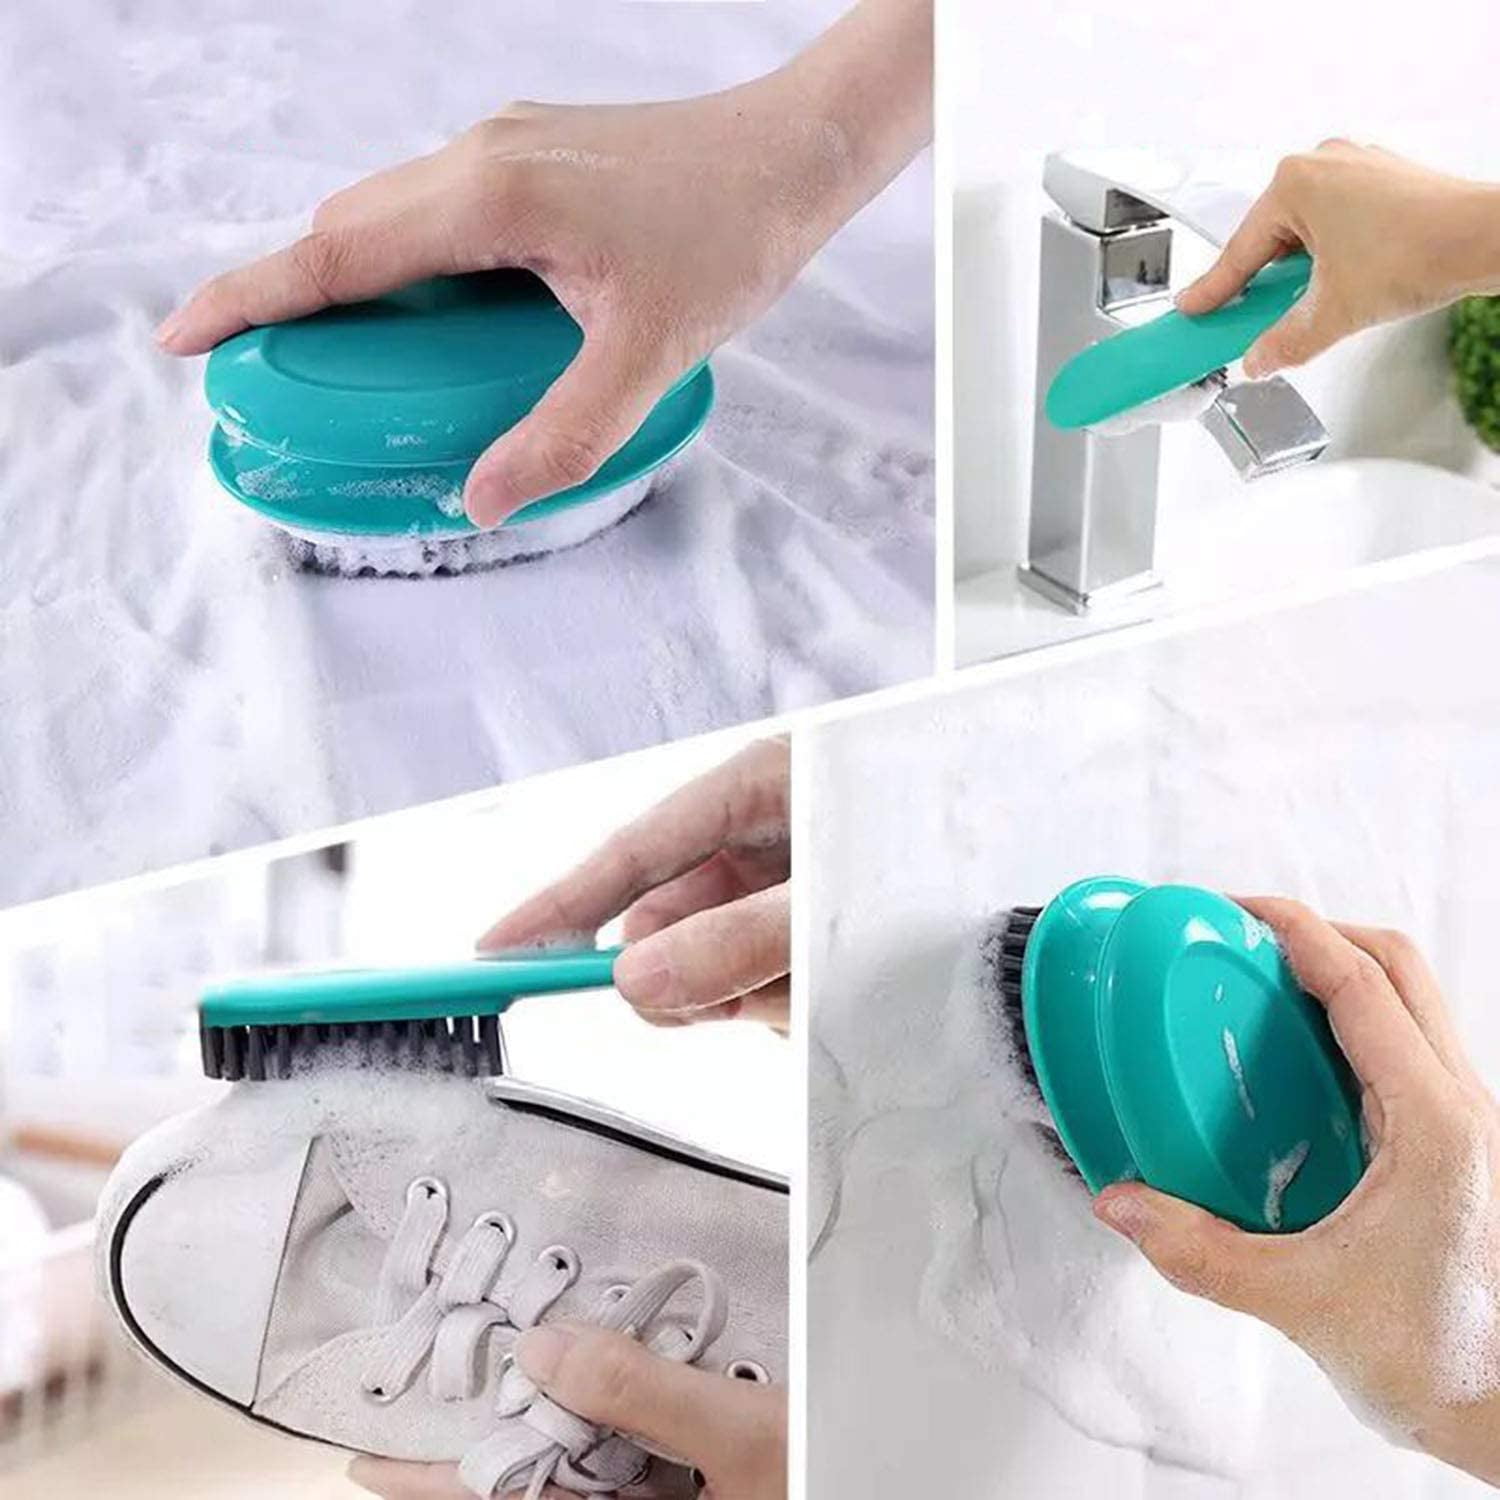 2pcs Plastic Soft Laundry Clothes Shoes Scrub Brushes XGao Scrubbing Brush Portable Lightweight No Scratch Hands Cleaning Brush with a Comfortable Grip for Clothes Underwear Shoes Clean Tool 